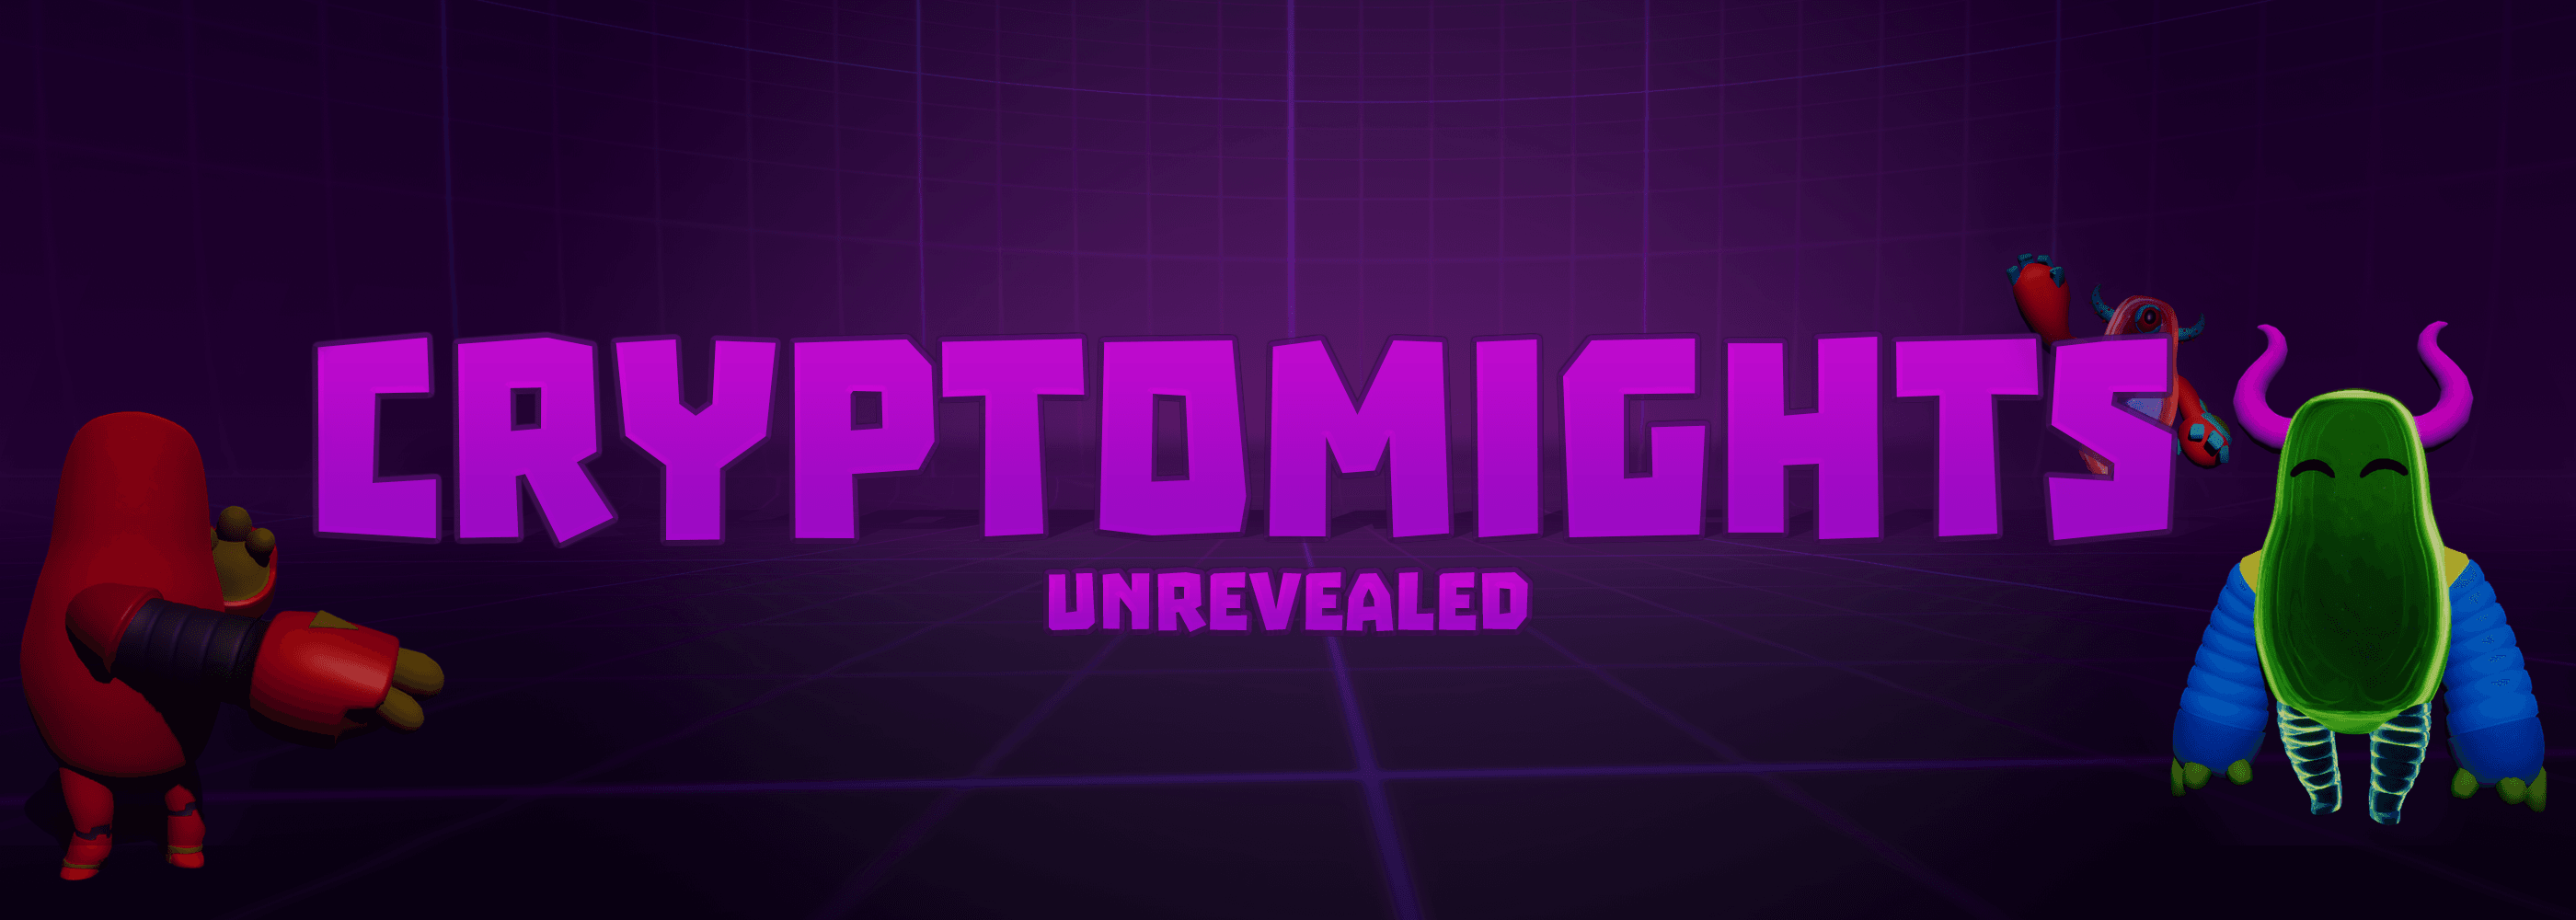 Cryptomights Unrevealed